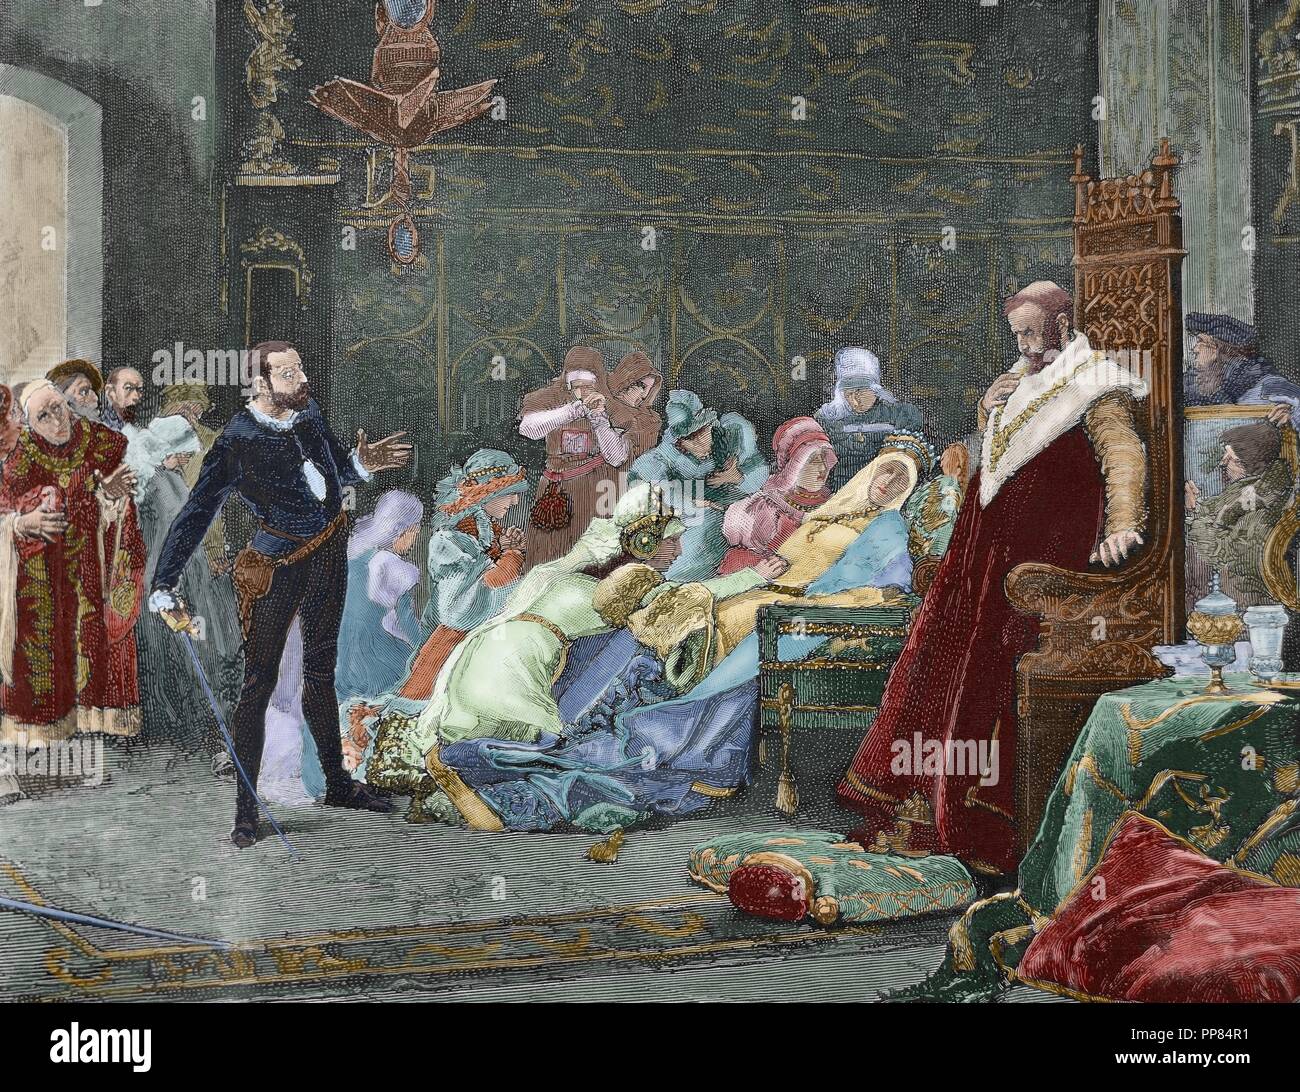 William Shakespeare (1564-1616). English writer. Hamlet. Queen Gertrude dies poisoned after drinking to the health of Hamlet for his victory in the duel with Laertes. Engraving after painting by Salvador Sanchez Barbudo 'The last scene of Hamlet,' 1884. Engraving, 19th century. Colored. Stock Photo